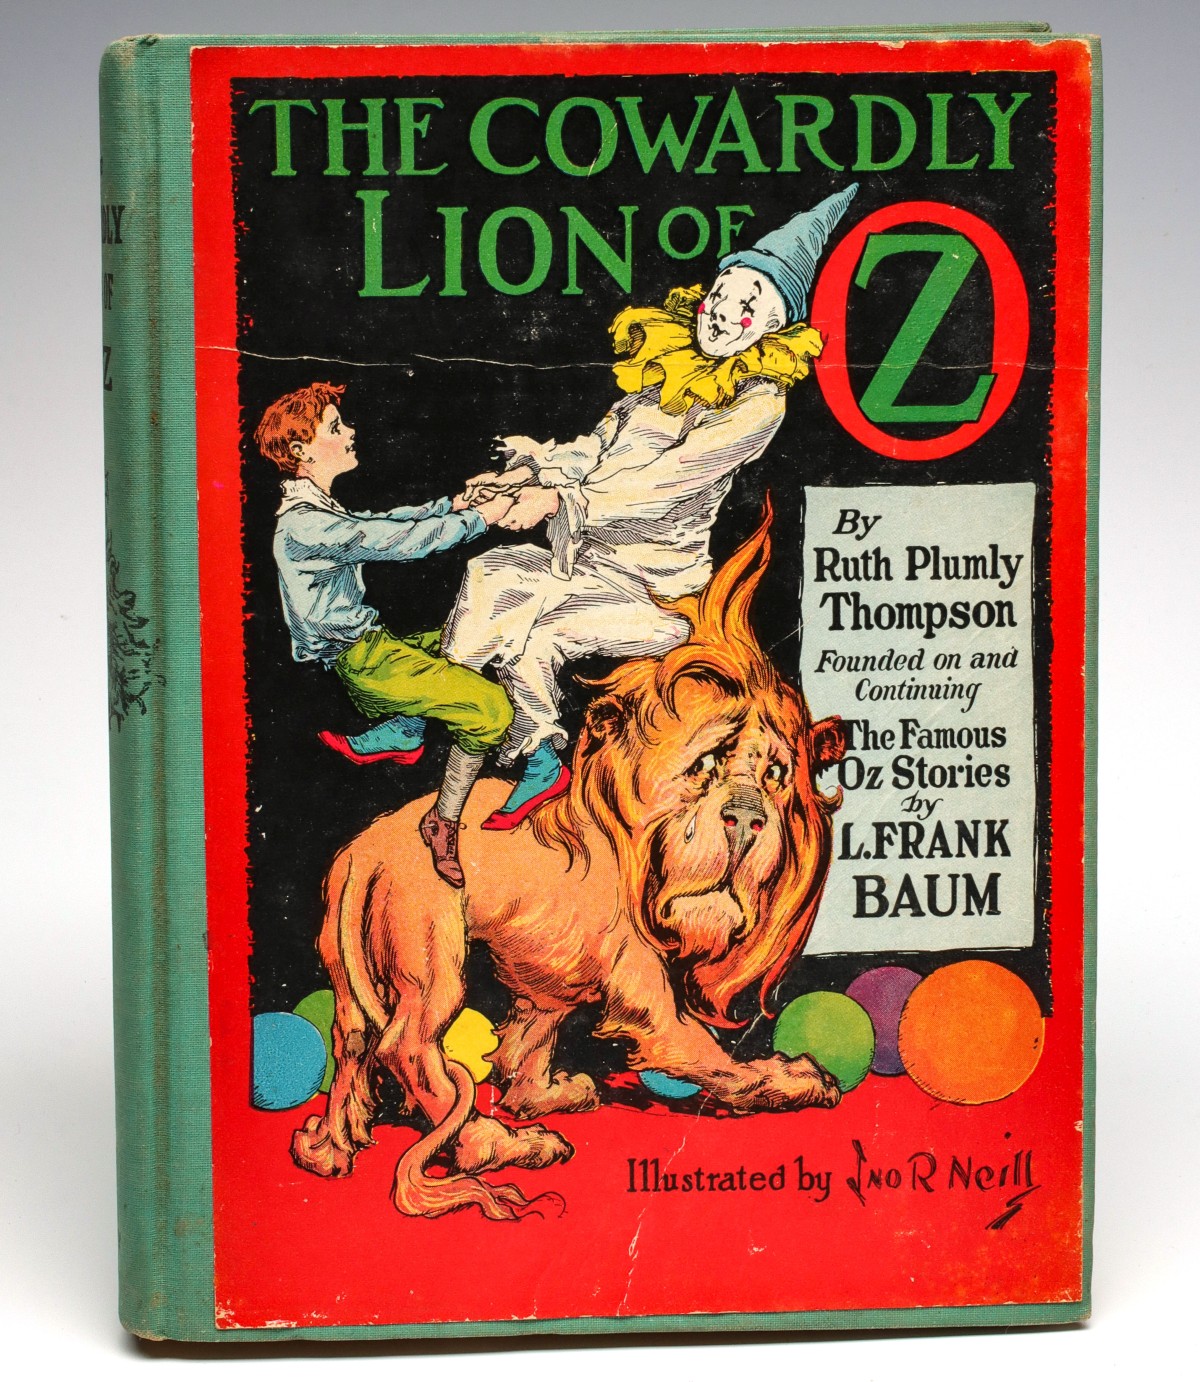 COWARDLY LION OF OZ BY RUTH PLUMLEY AFTER FRANK BAUM